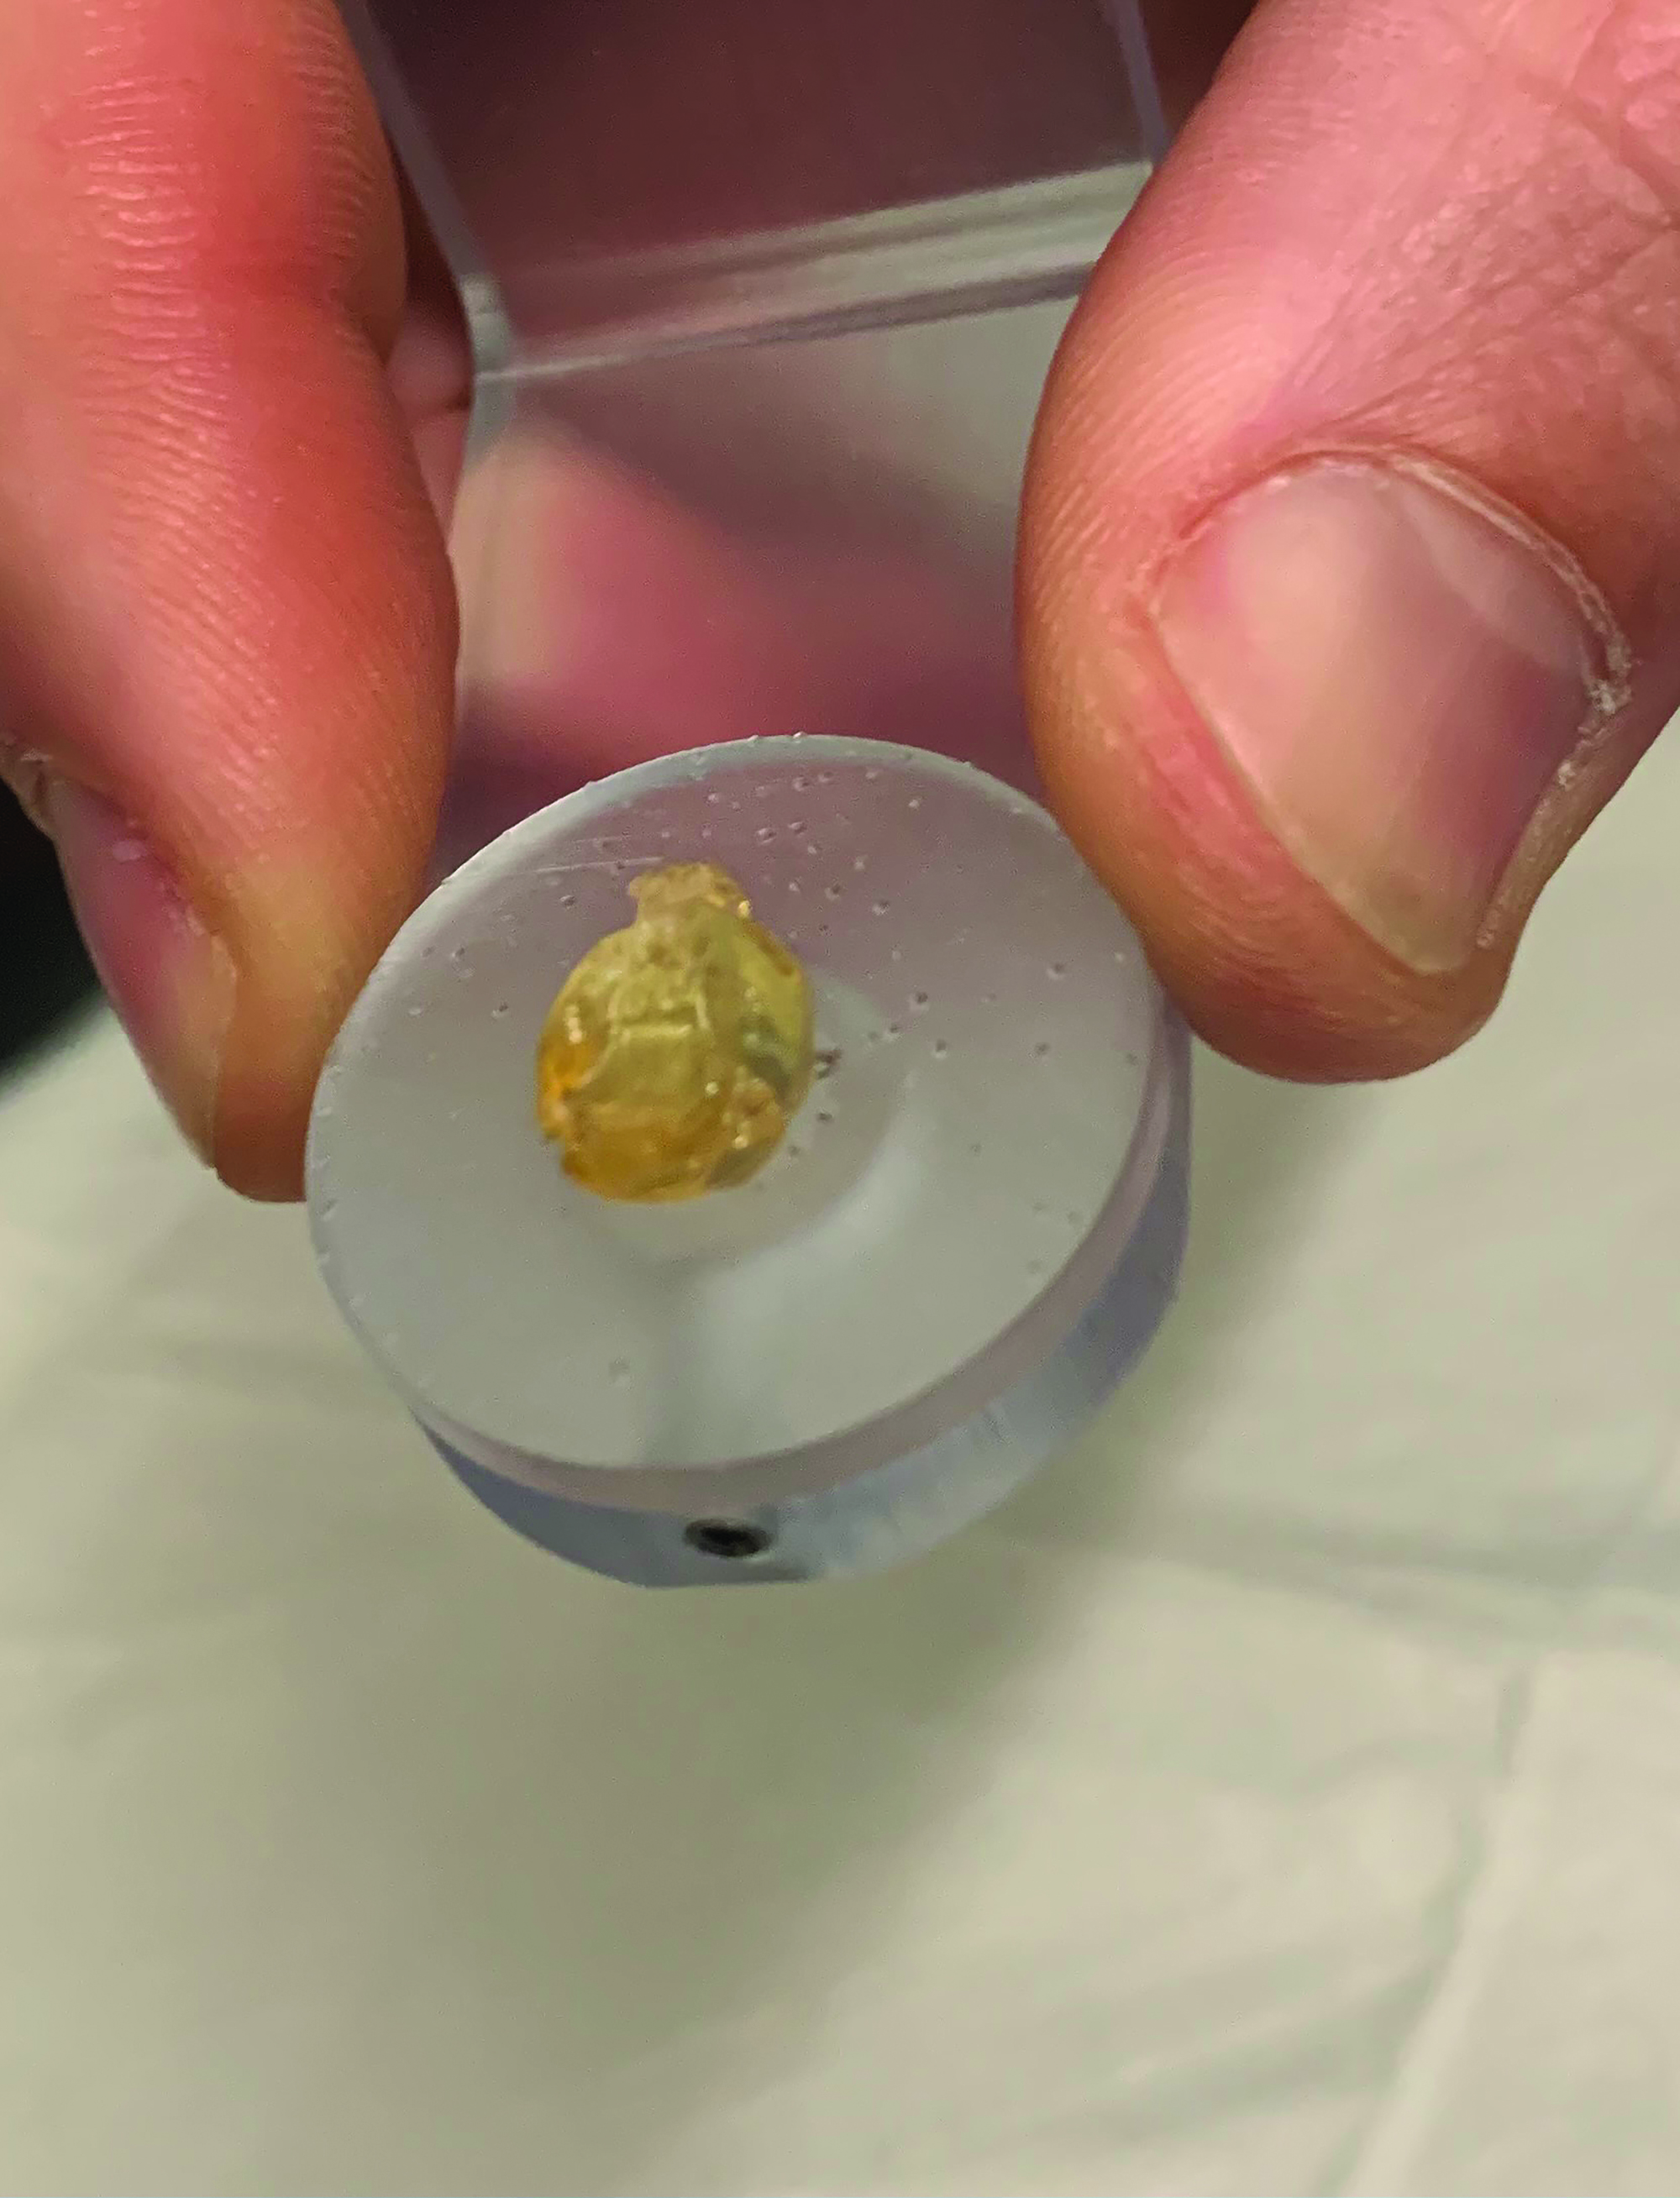 A cleared mouse brain (it looks transparent and yellow) is secured to a sample holder in preparation for imaging. It's being held between a forefinger and a thumb.